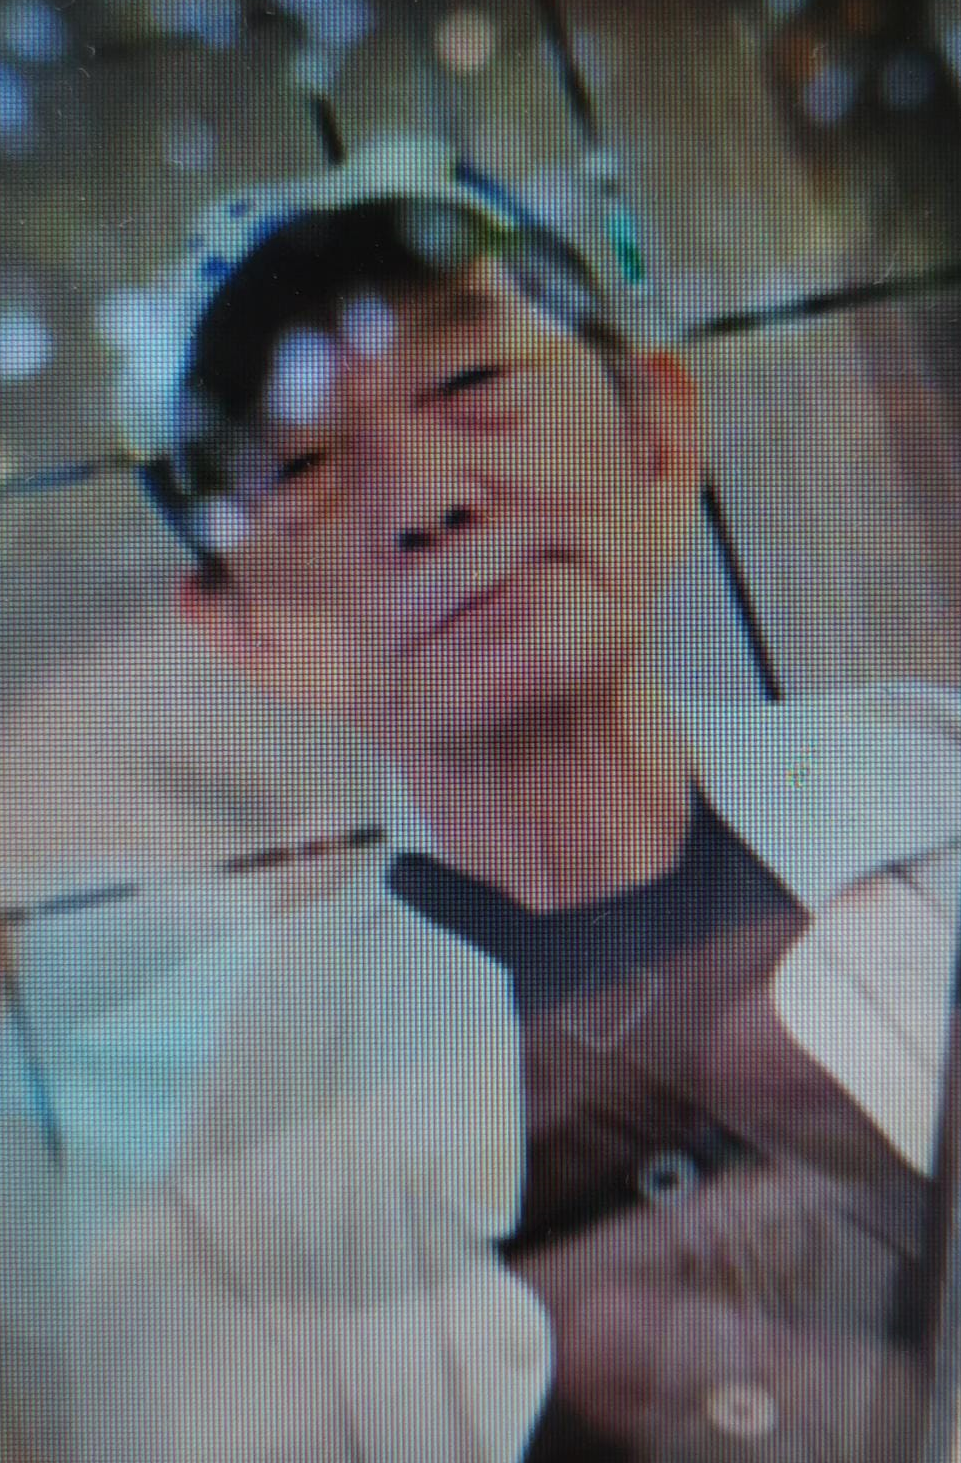 Nip Kai-yuen, aged 87, is about 1.65 metres tall, 45 kilograms in weight and of thin build. He has a long face with yellow complexion and short black hair. He was last seen wearing a black jacket, black trousers, black shoes, a blue and white cap and carrying a black shoulder bag.